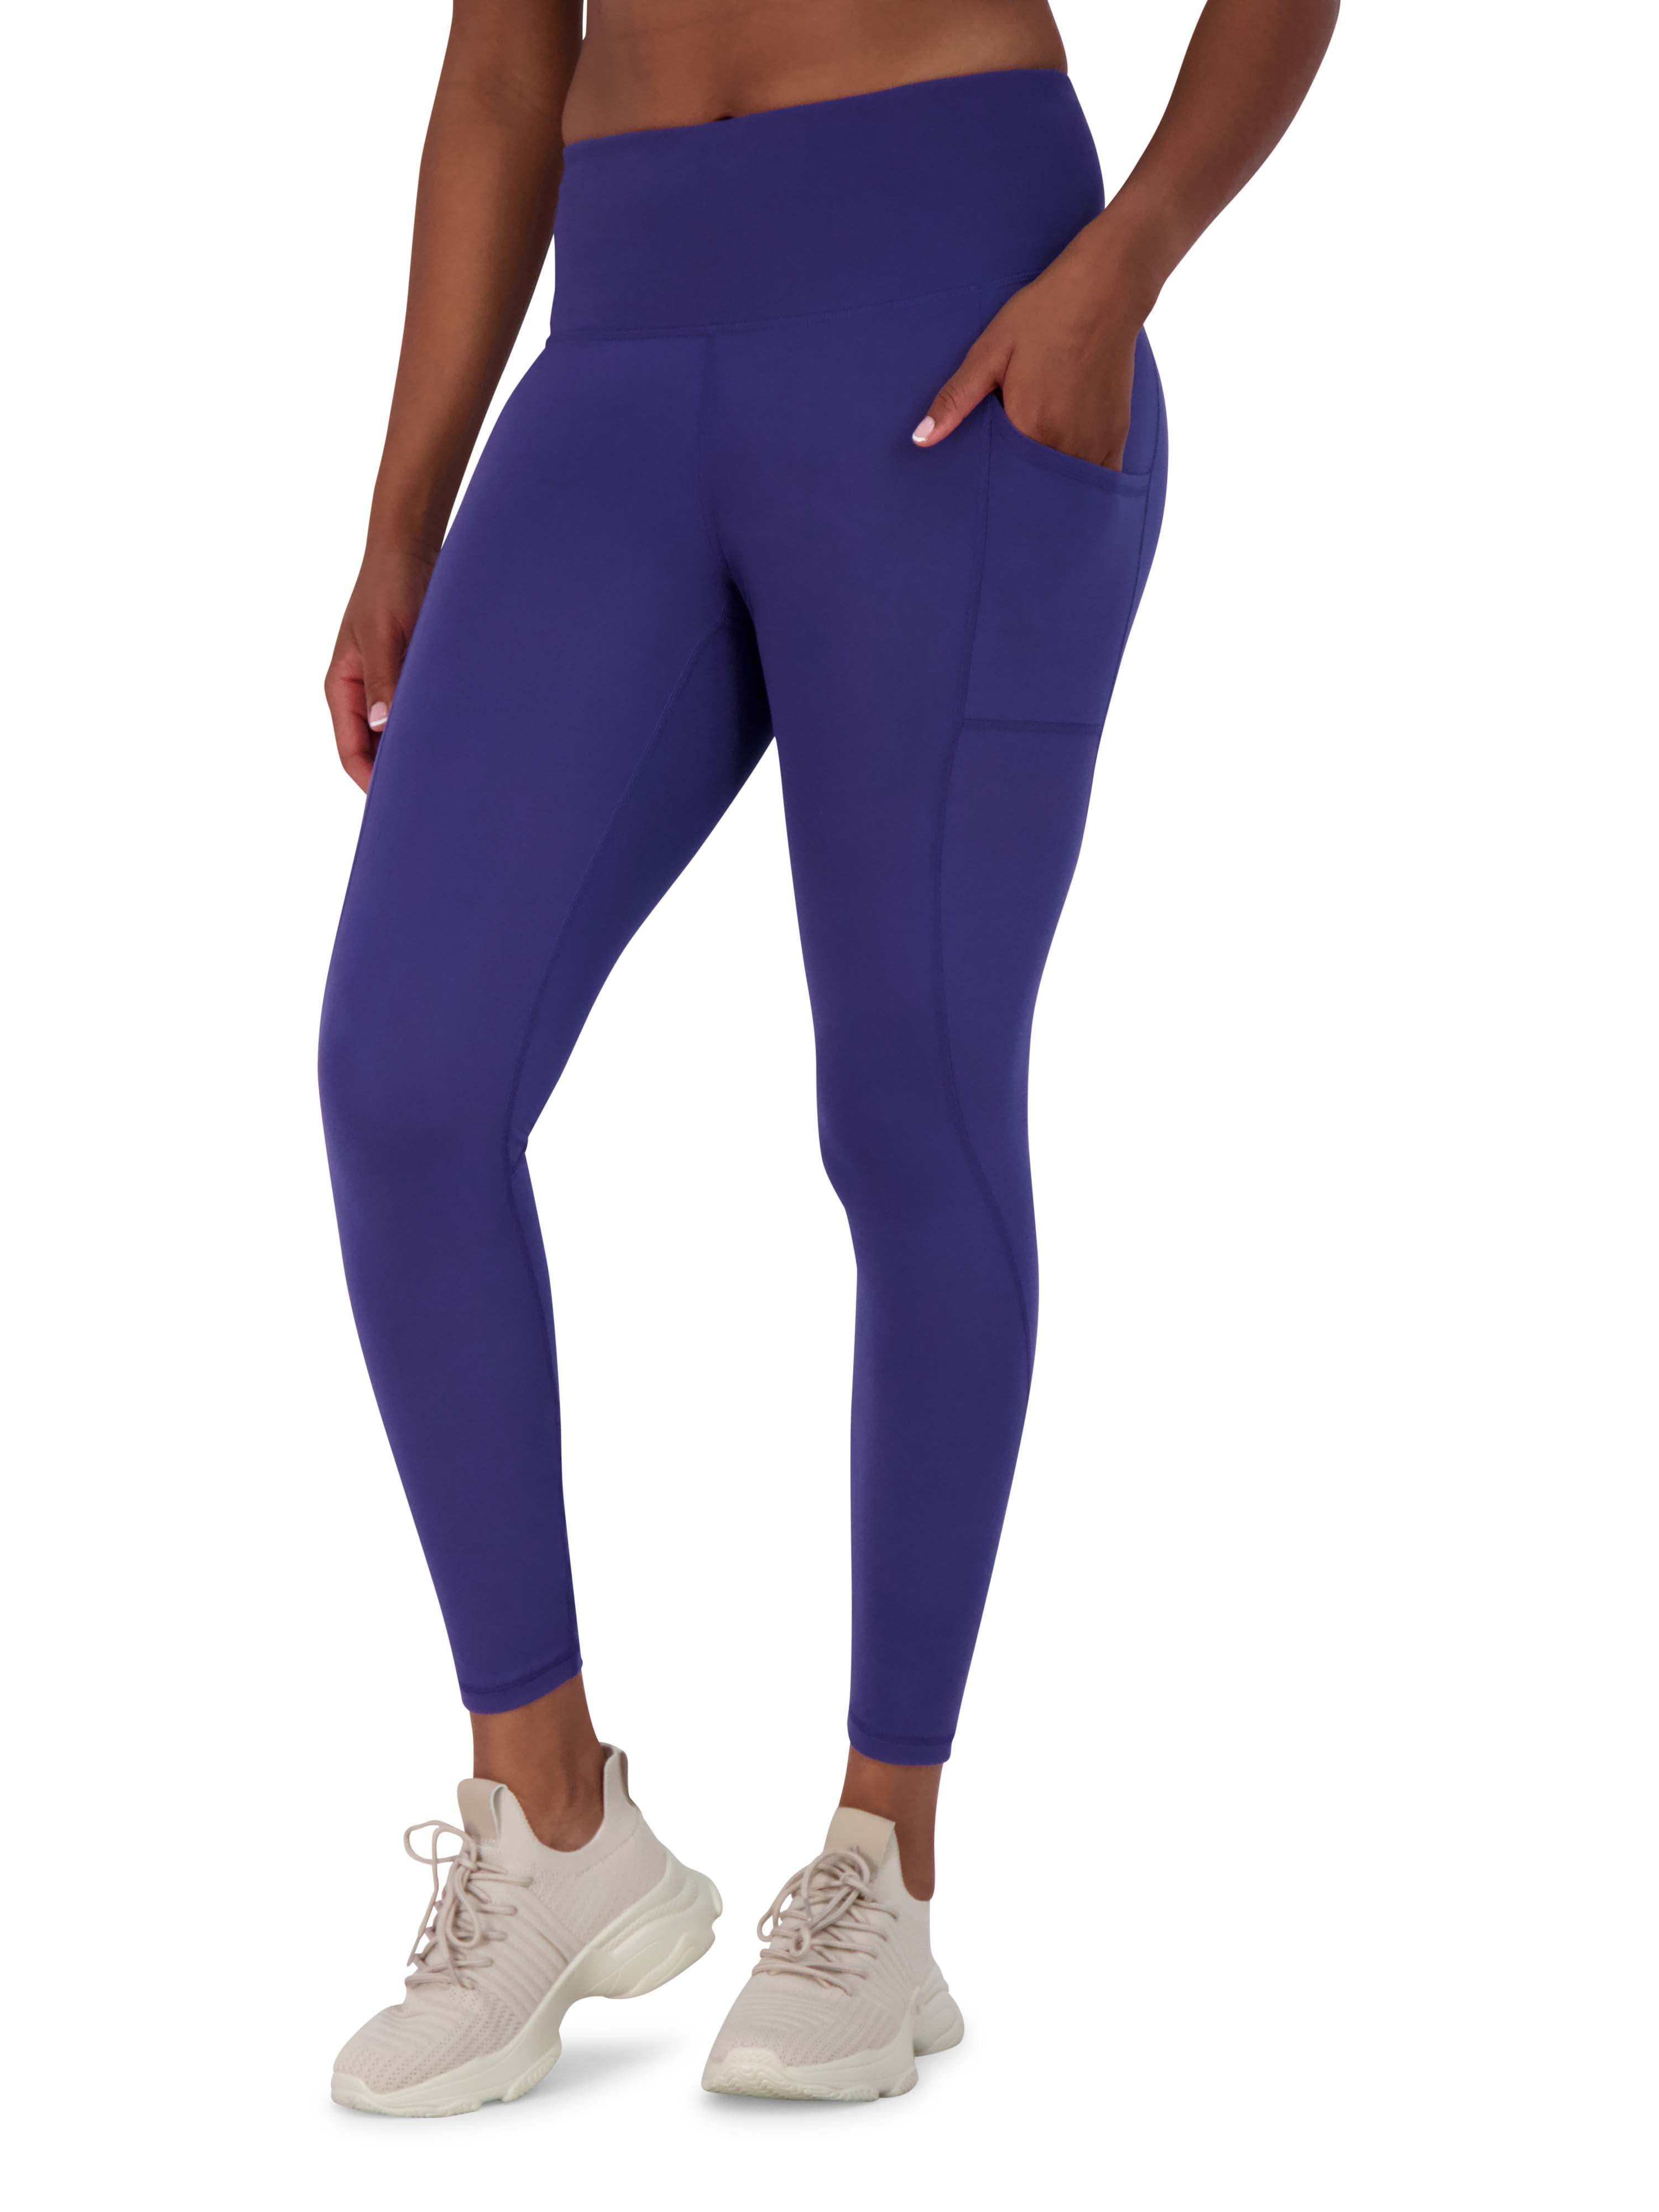 Lululemon Fast and Free High-Rise Tight Leggings Pockets – 25